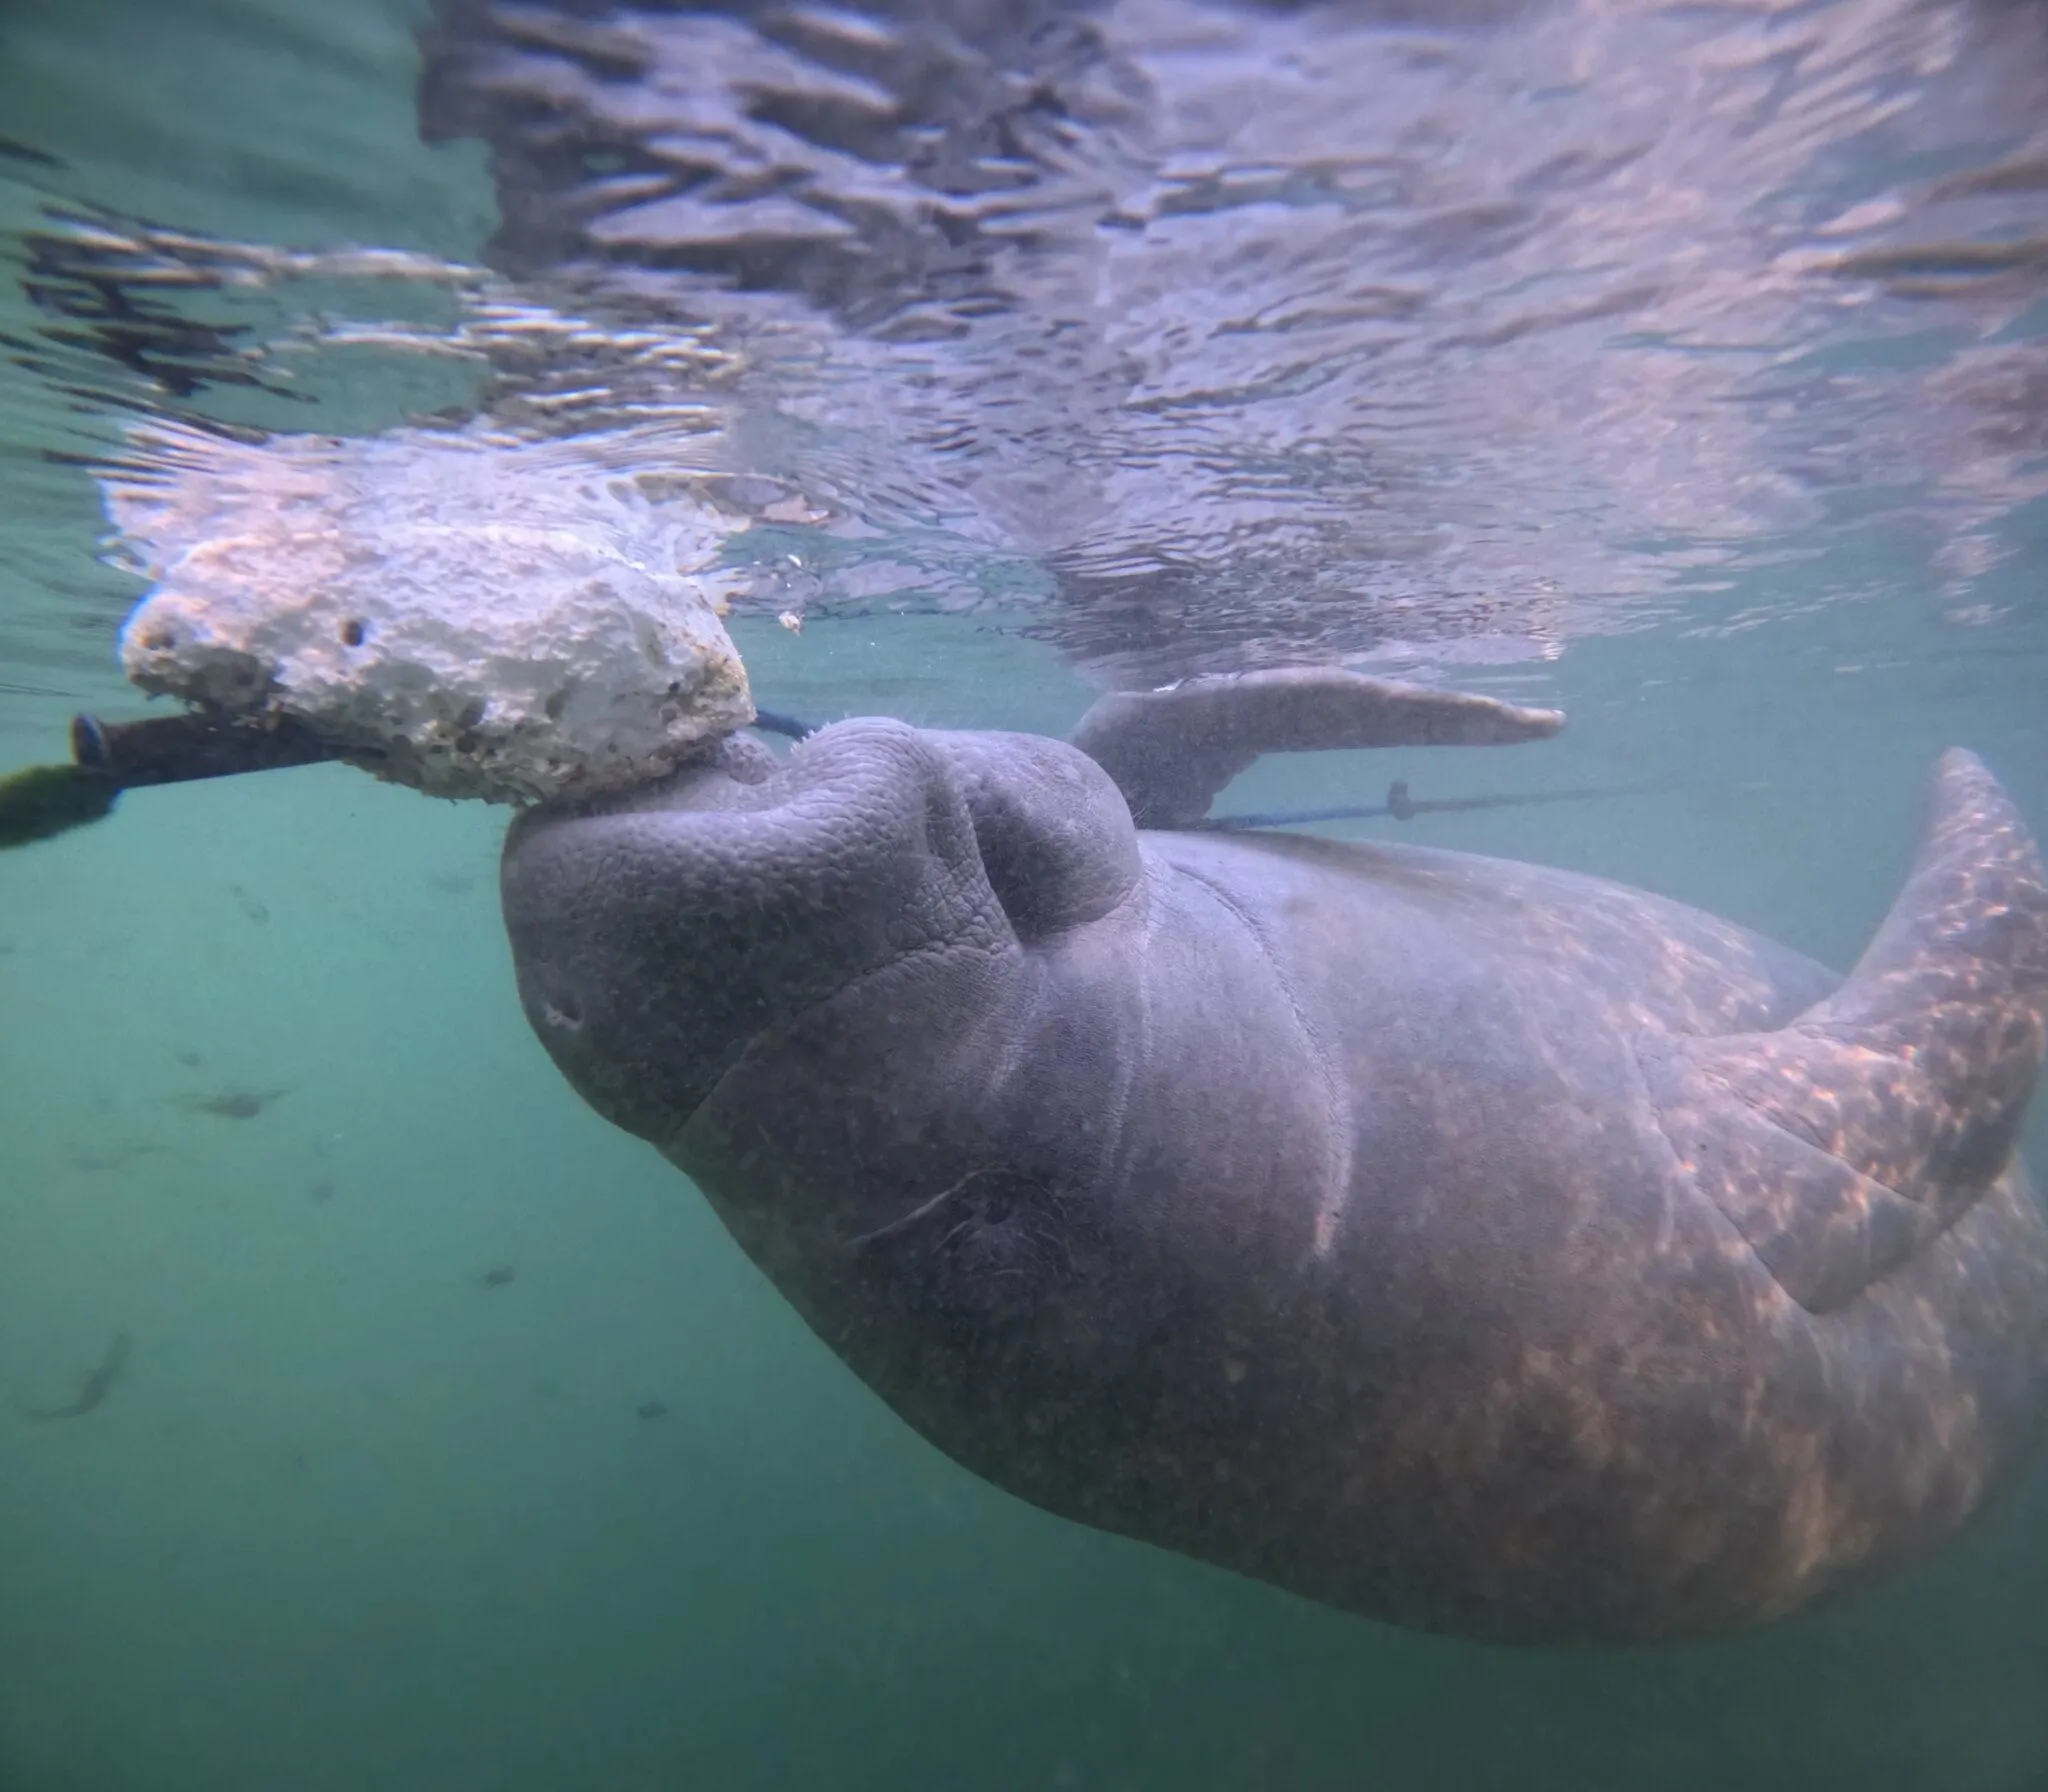 Manatee chewing on rope while swimming upside down